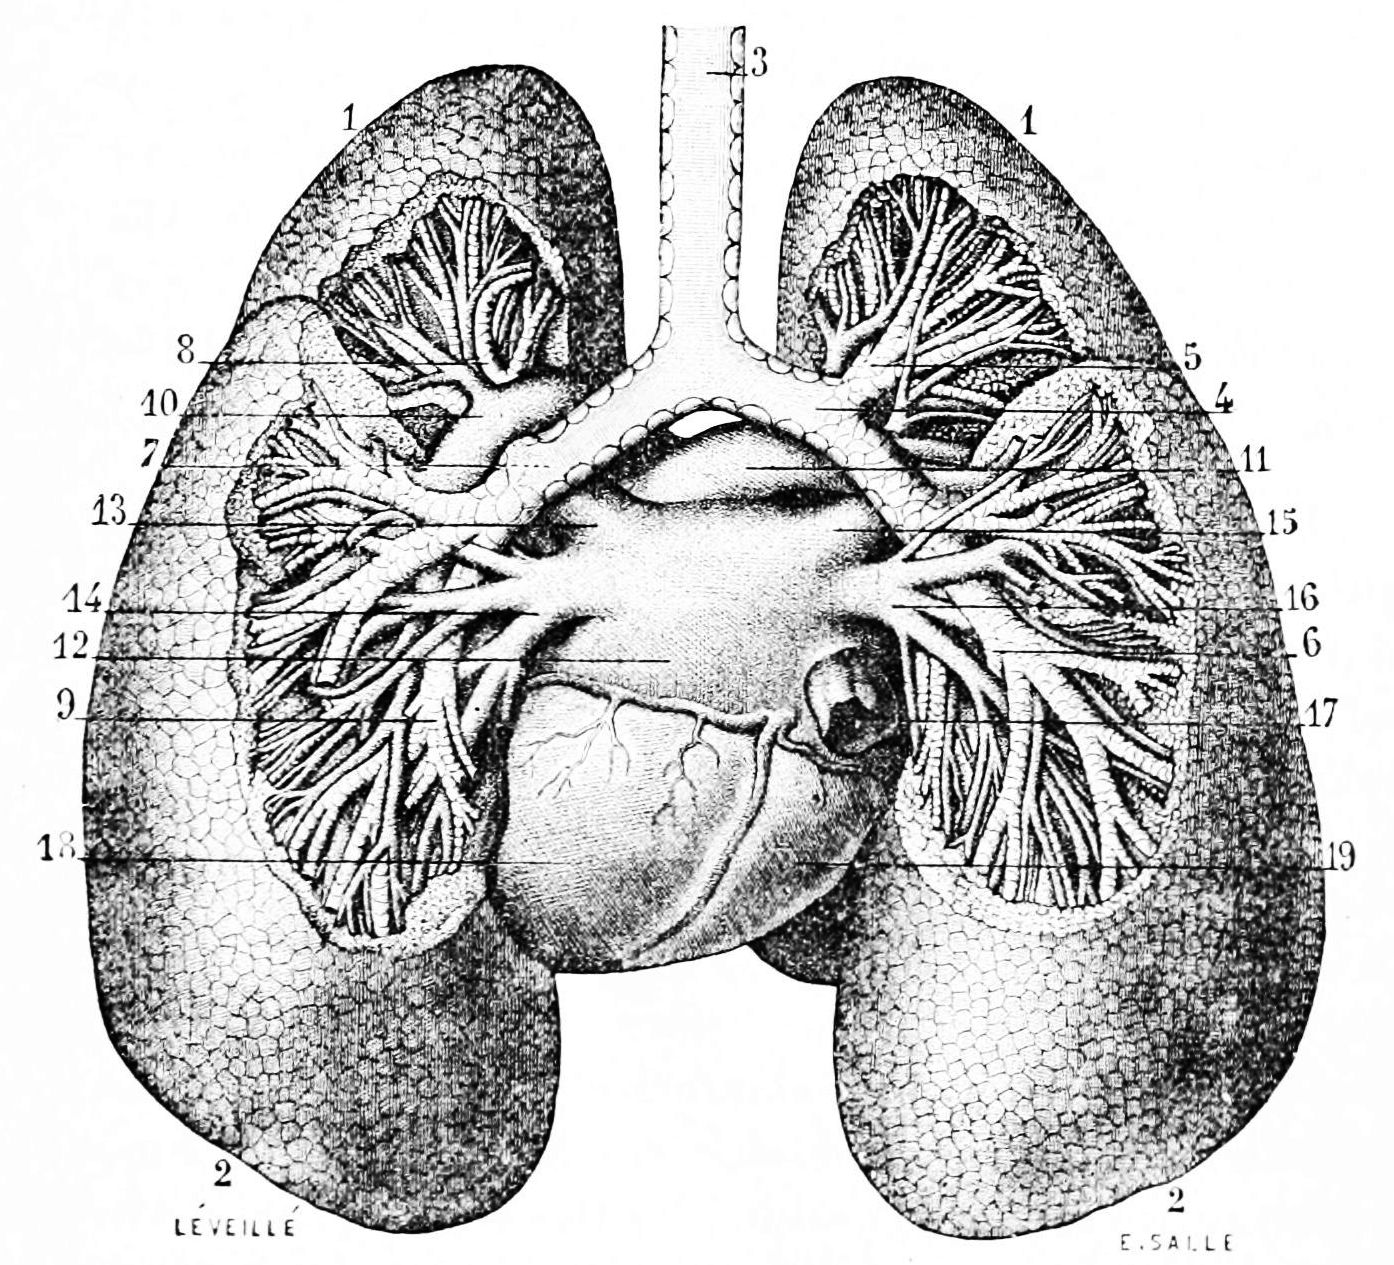 PSM_V20_D771_Bronchi_and_lungs_of_man.jpg